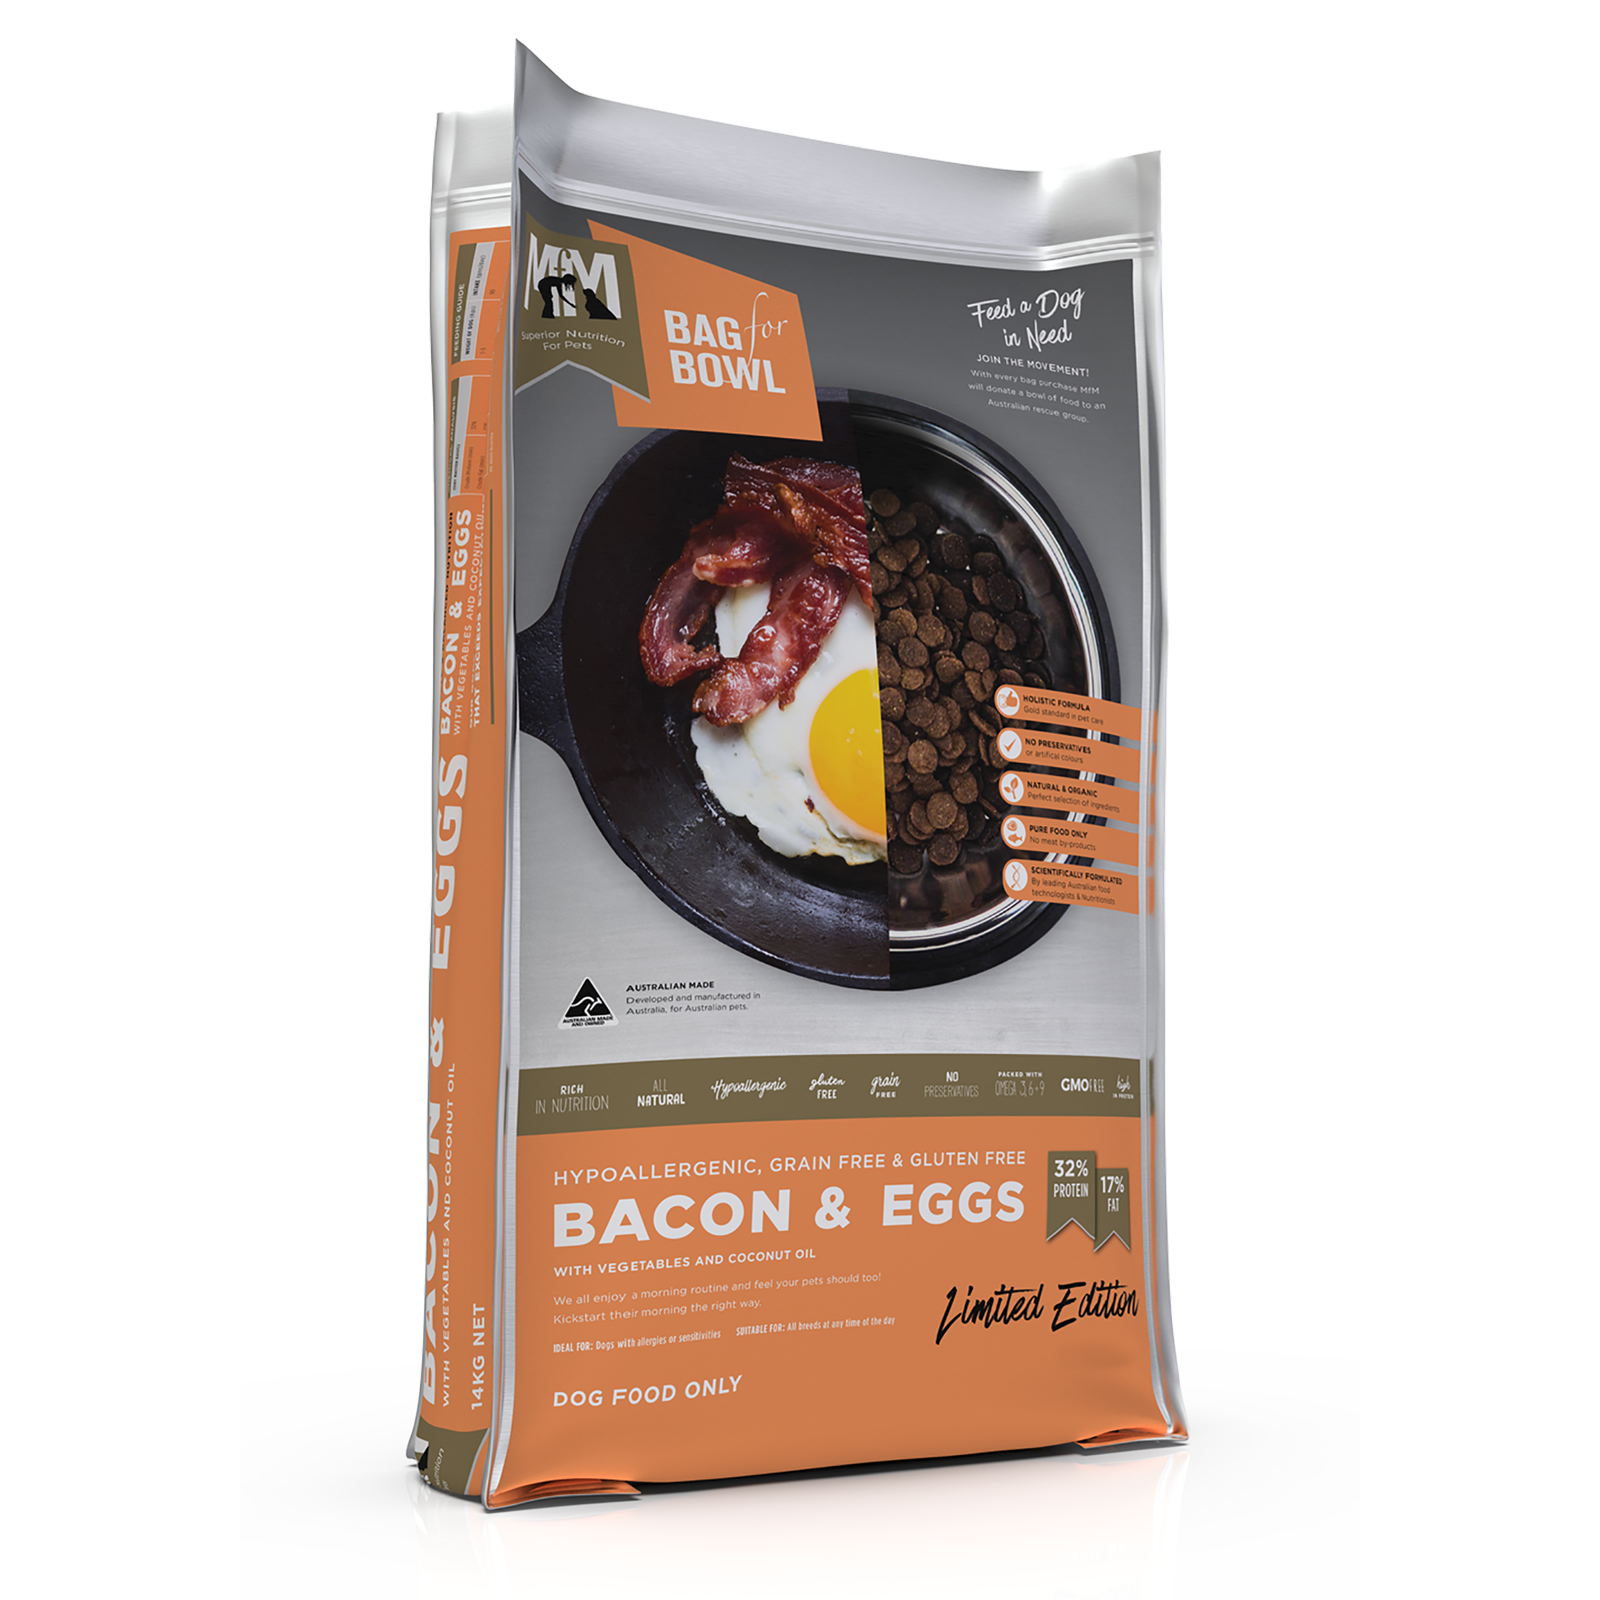 Meals For Mutts Dog Food Adult Bacon & Eggs